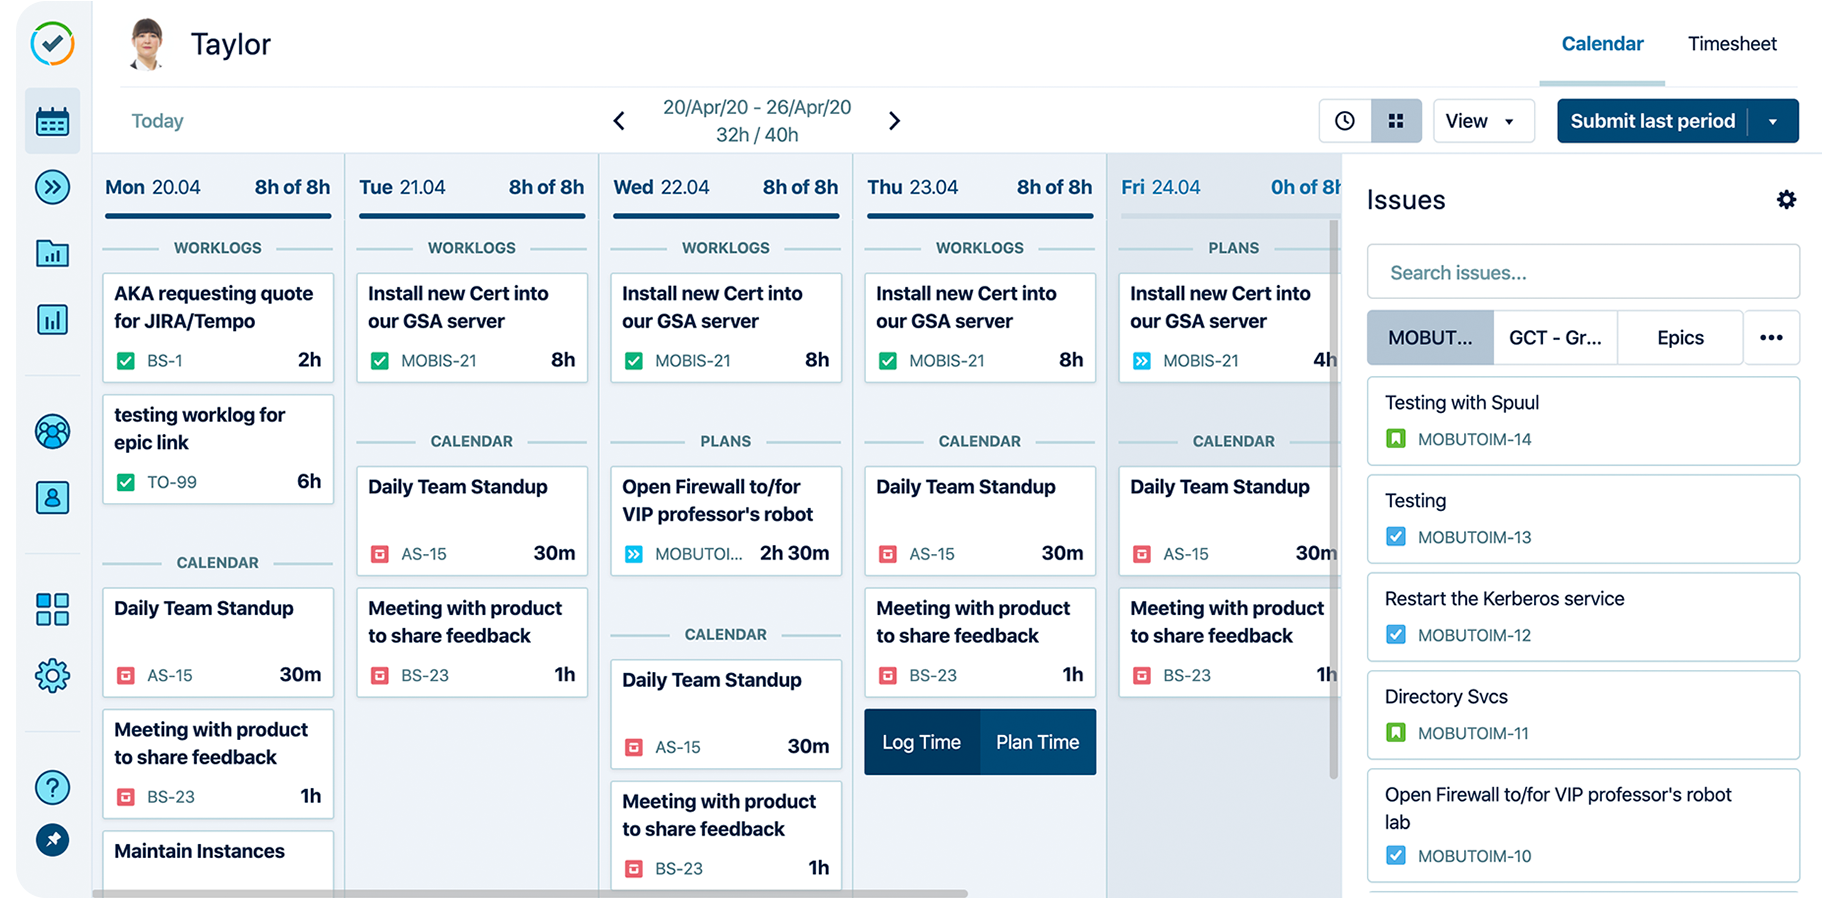 Embedded Time Tracking for Jira